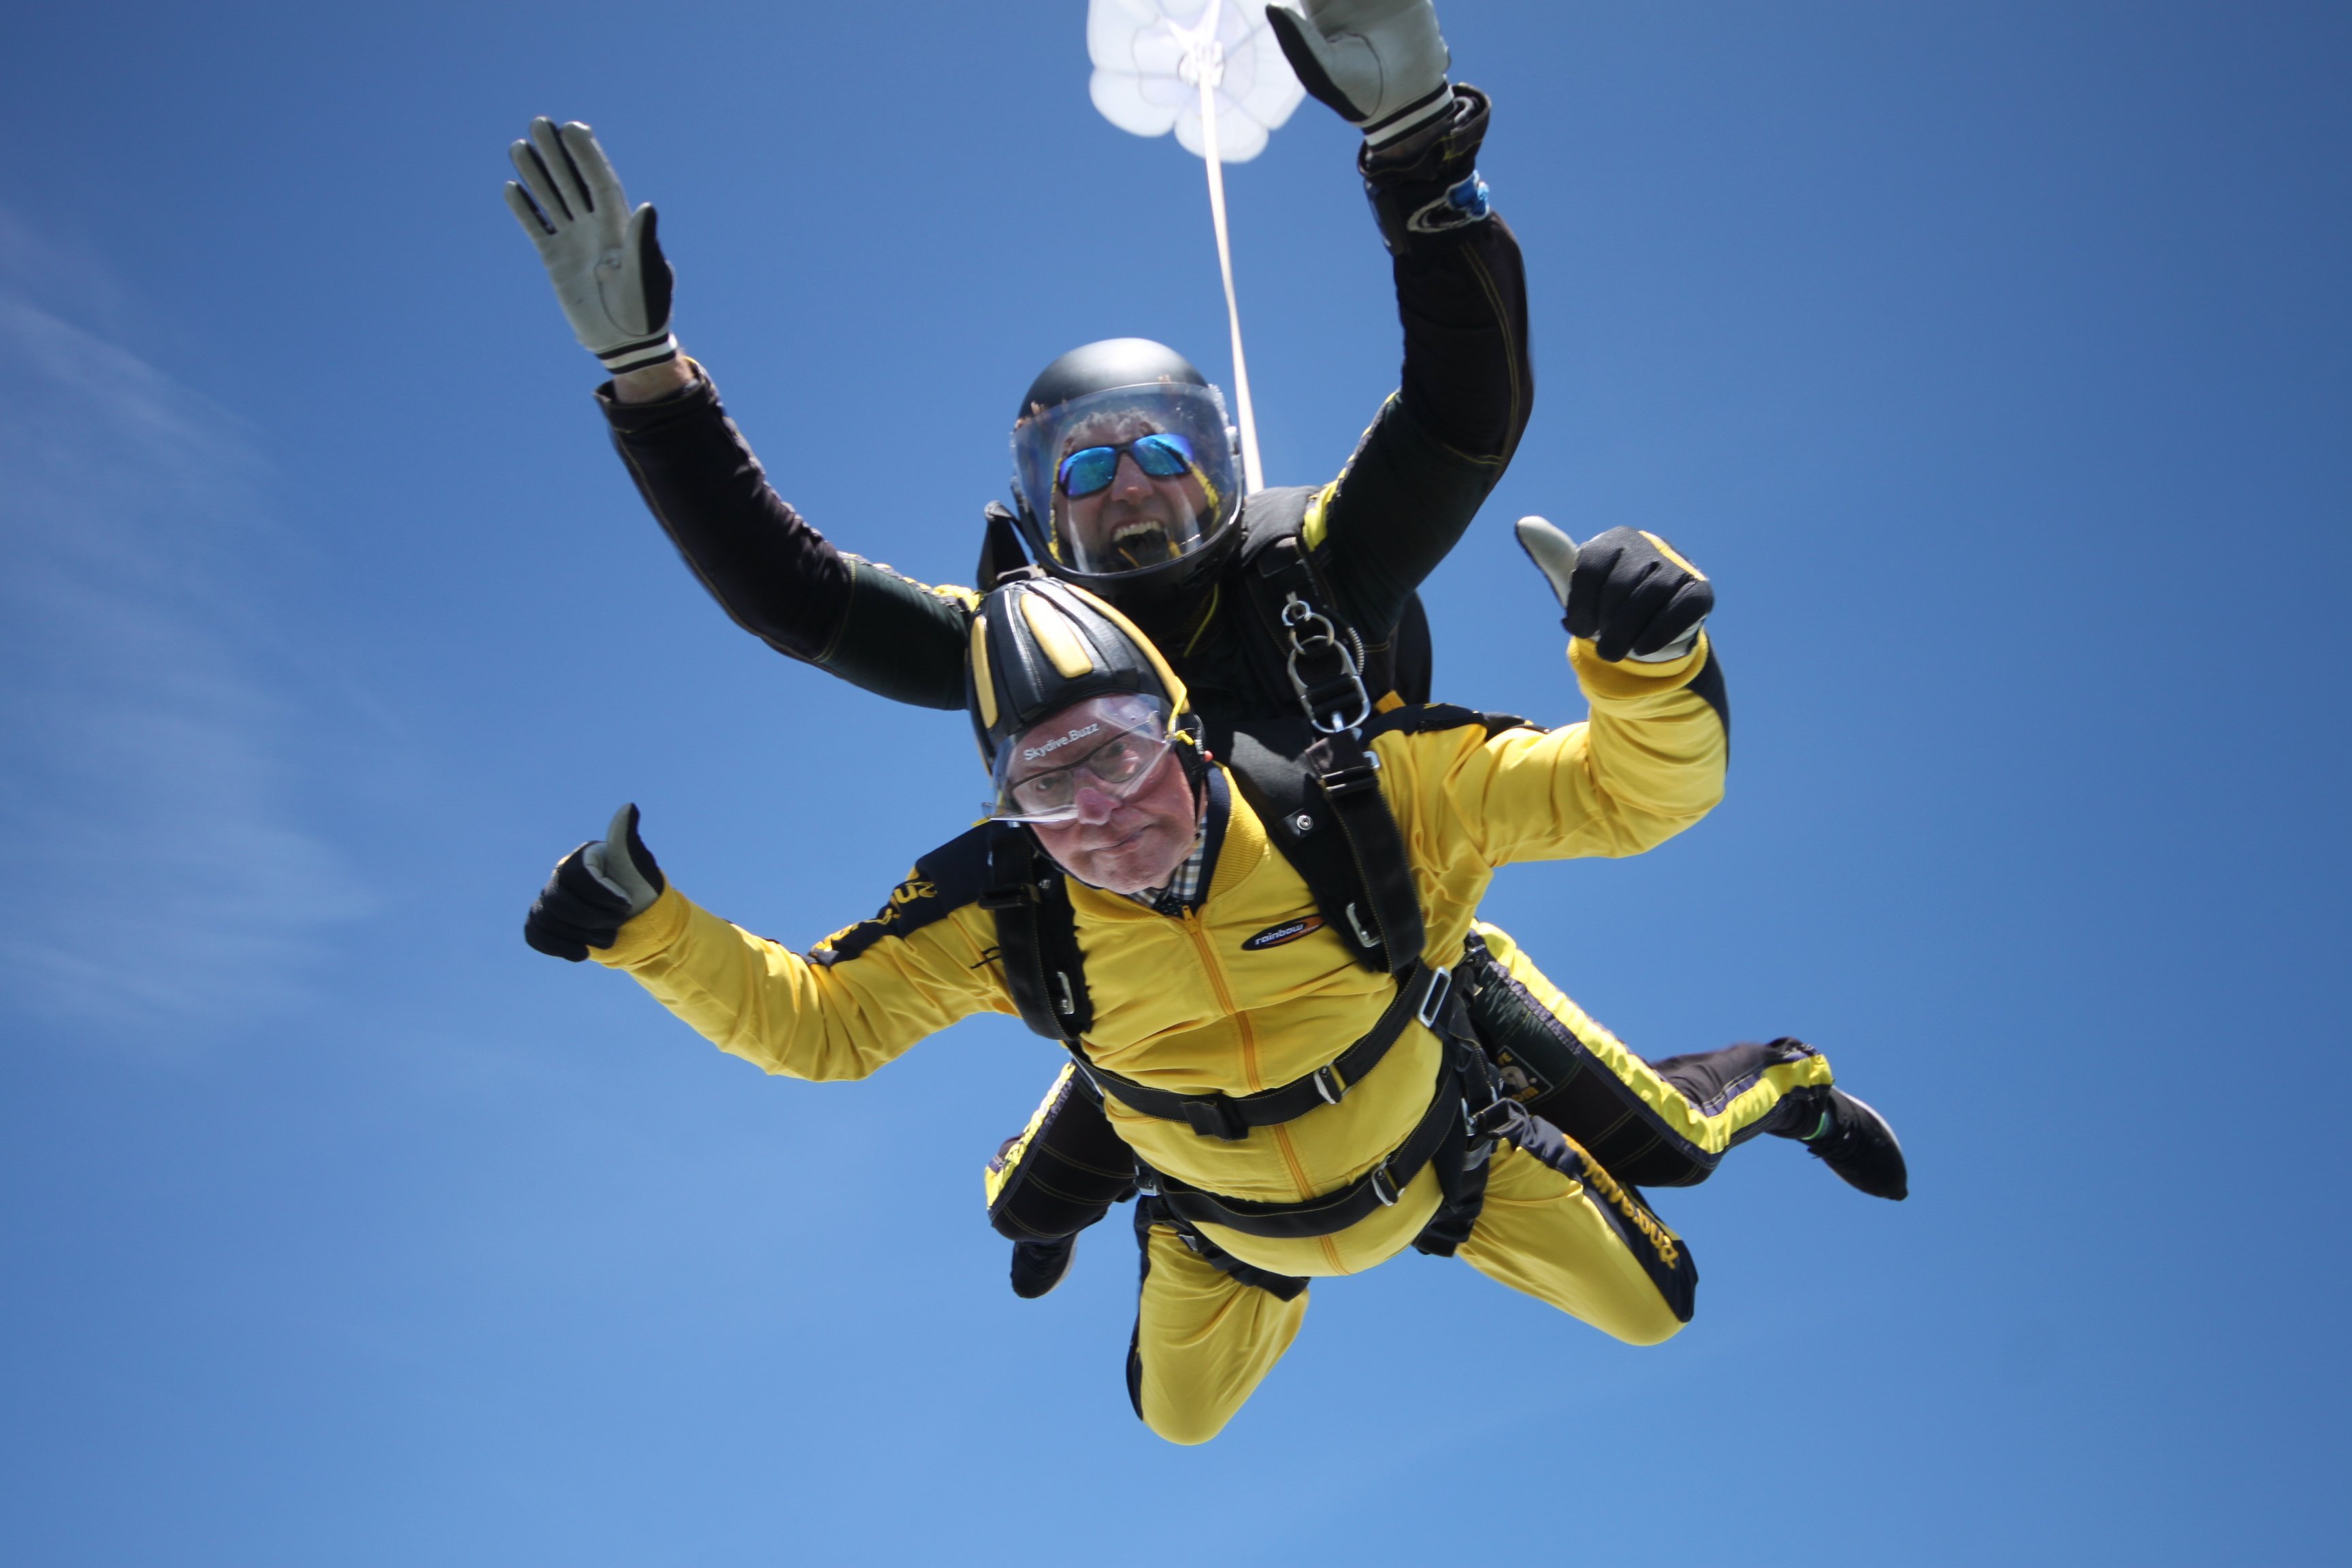 101-Year-Old 'Daredevil' Sets New Skydiving Record | FOX40